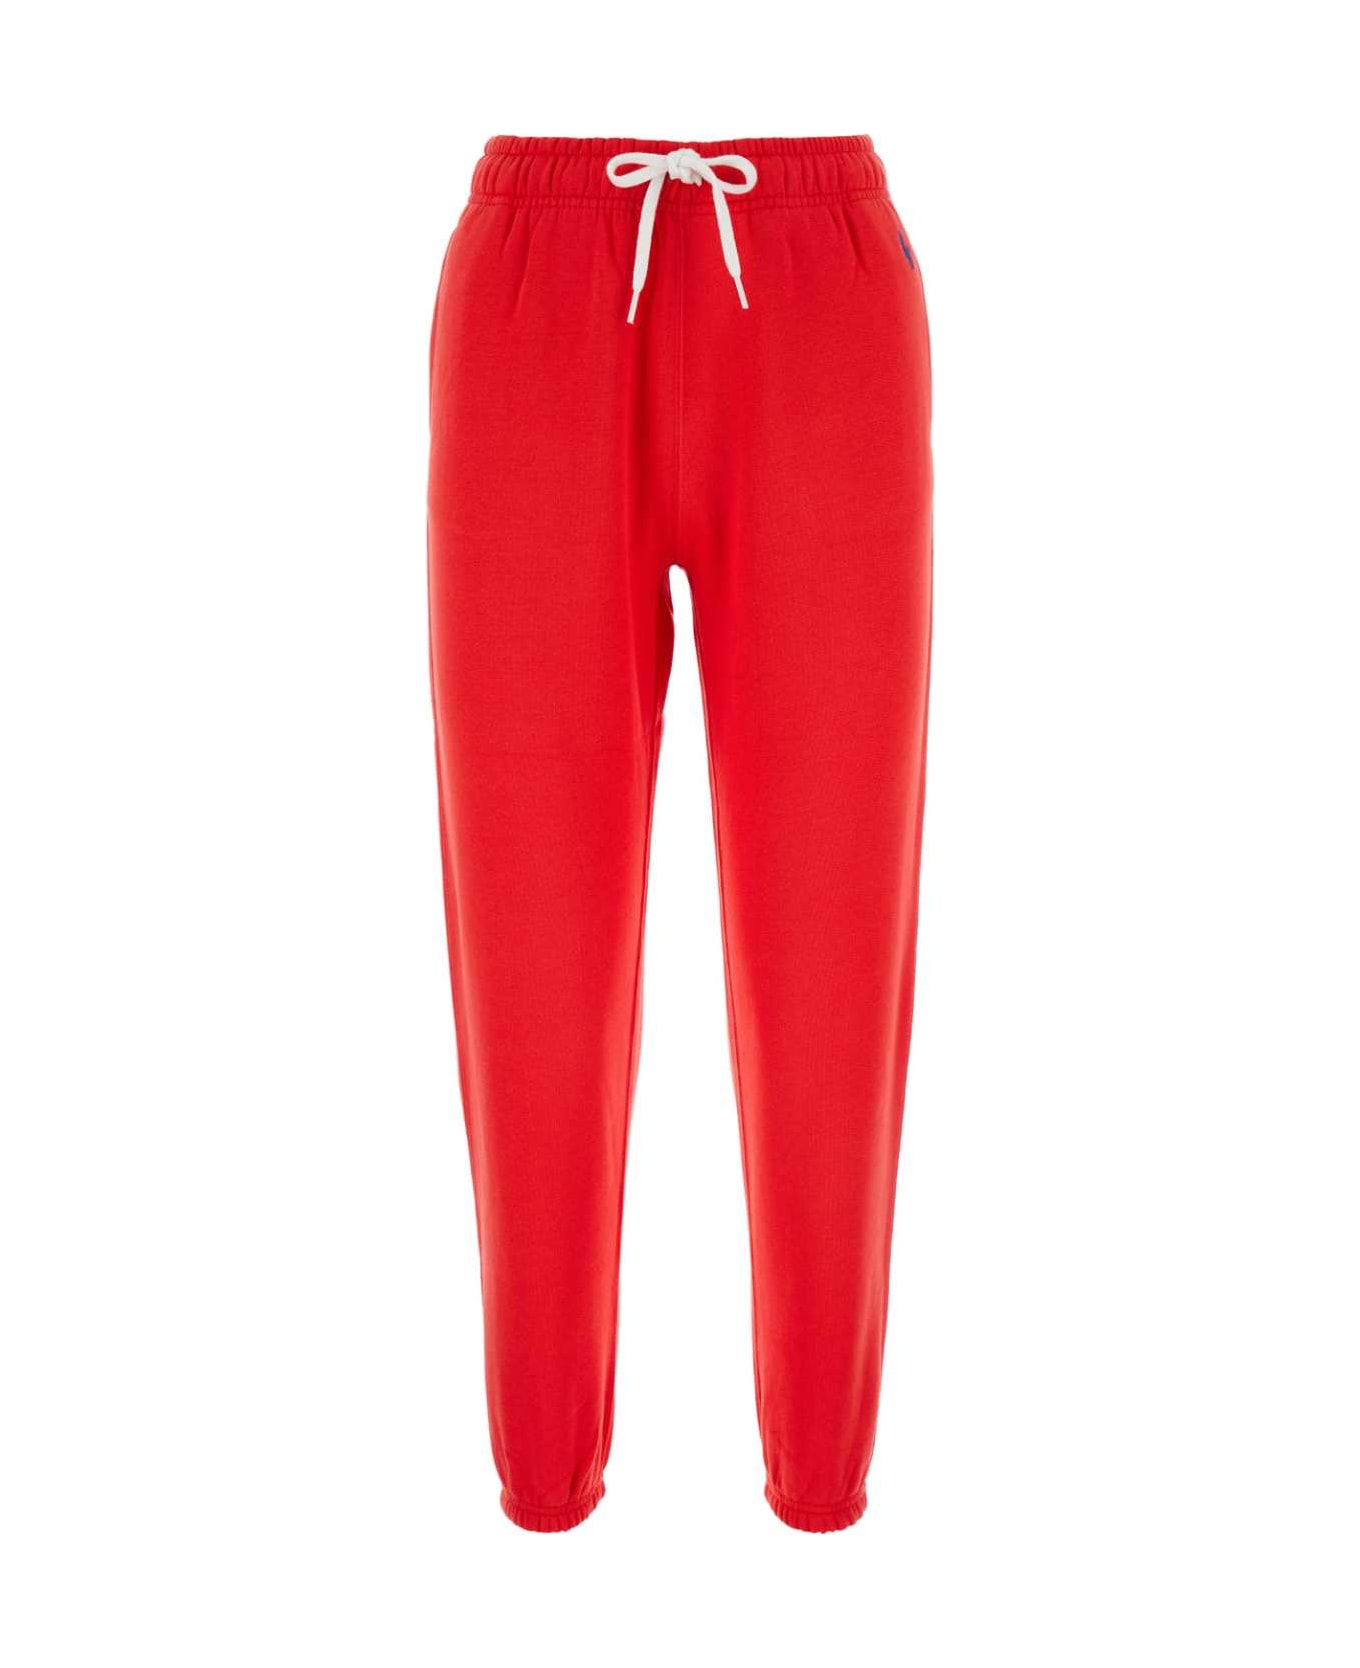 Polo Ralph Lauren Red Cotton Blend Joggers - BRIGHTHIBISCUS